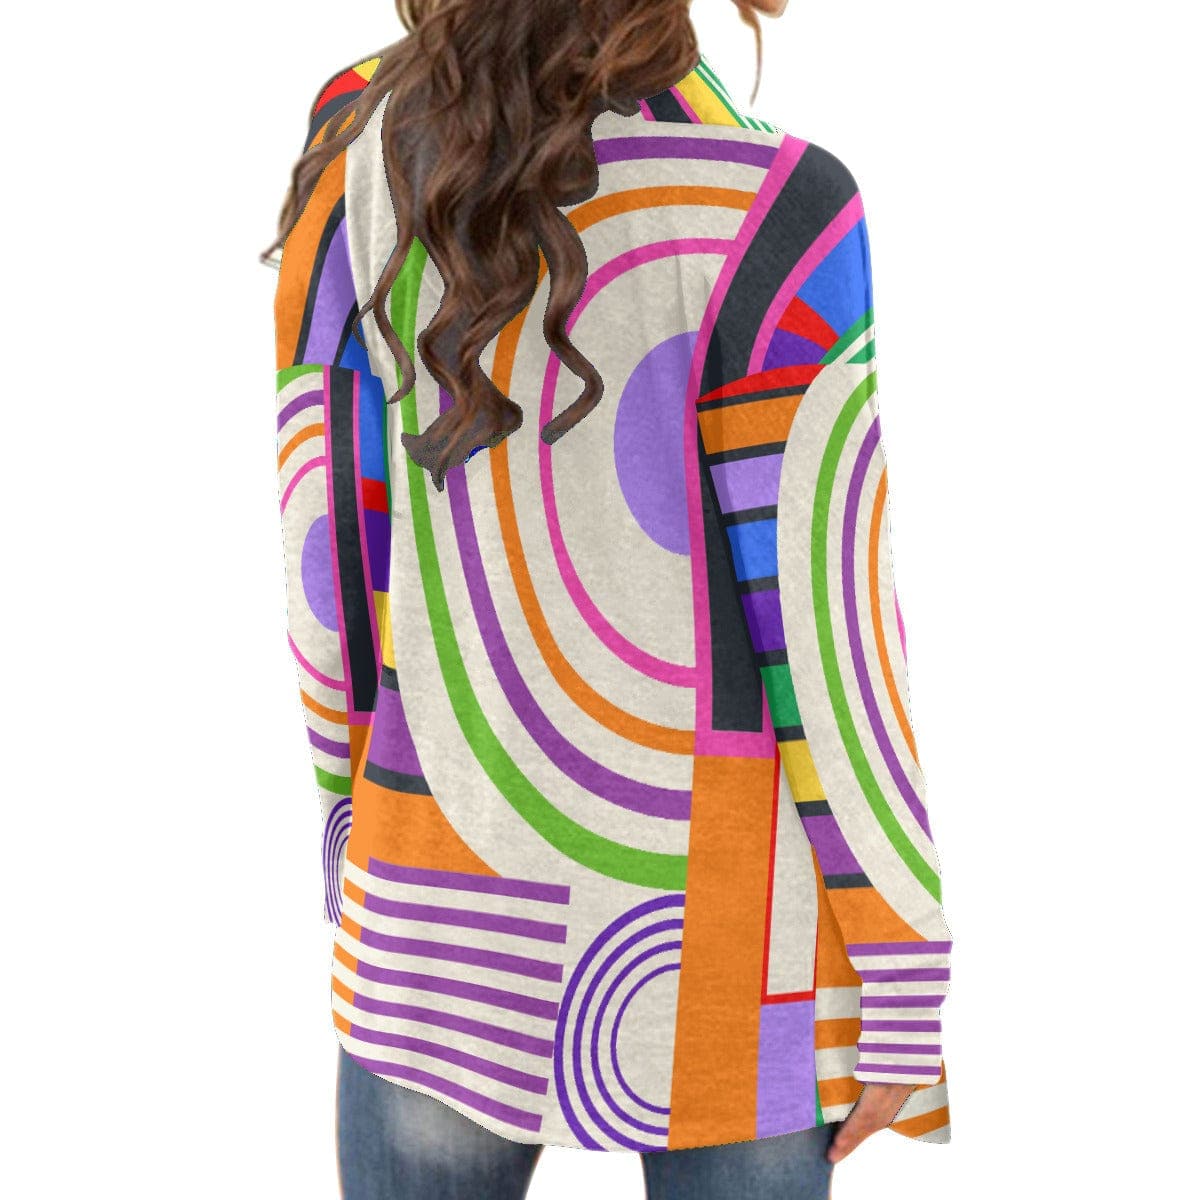 Vintage Colorfull Print Cardigan With Long Sleeve for Women by Sensus Studio